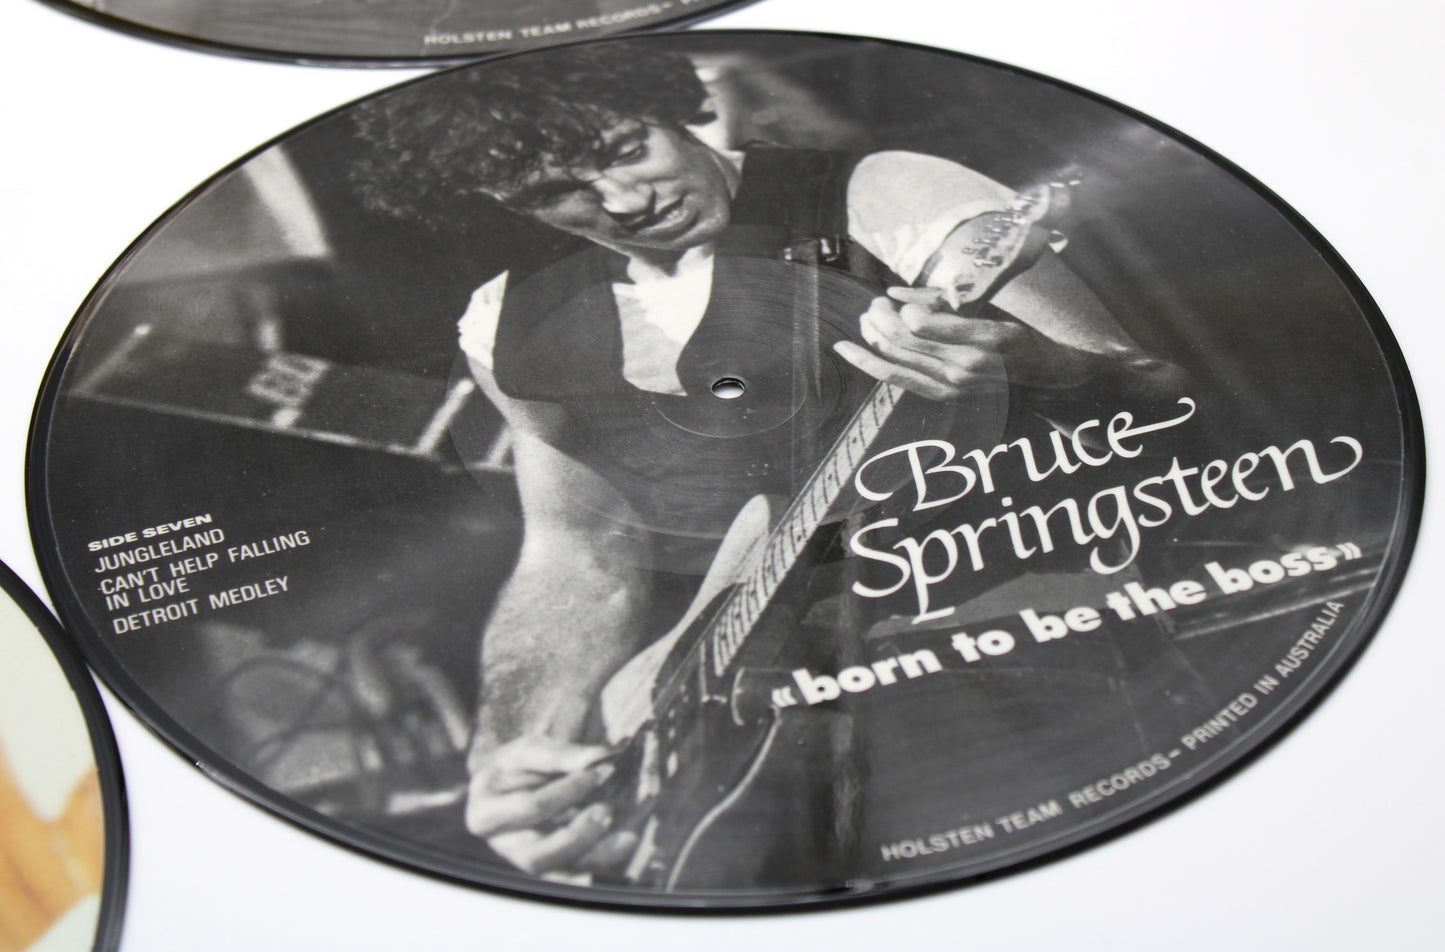 Bruce Springsteen - Summer '85 (RED) - Born To Be The Boss - 12" Vinyl bootleg collection 4 LPs BLV near mint